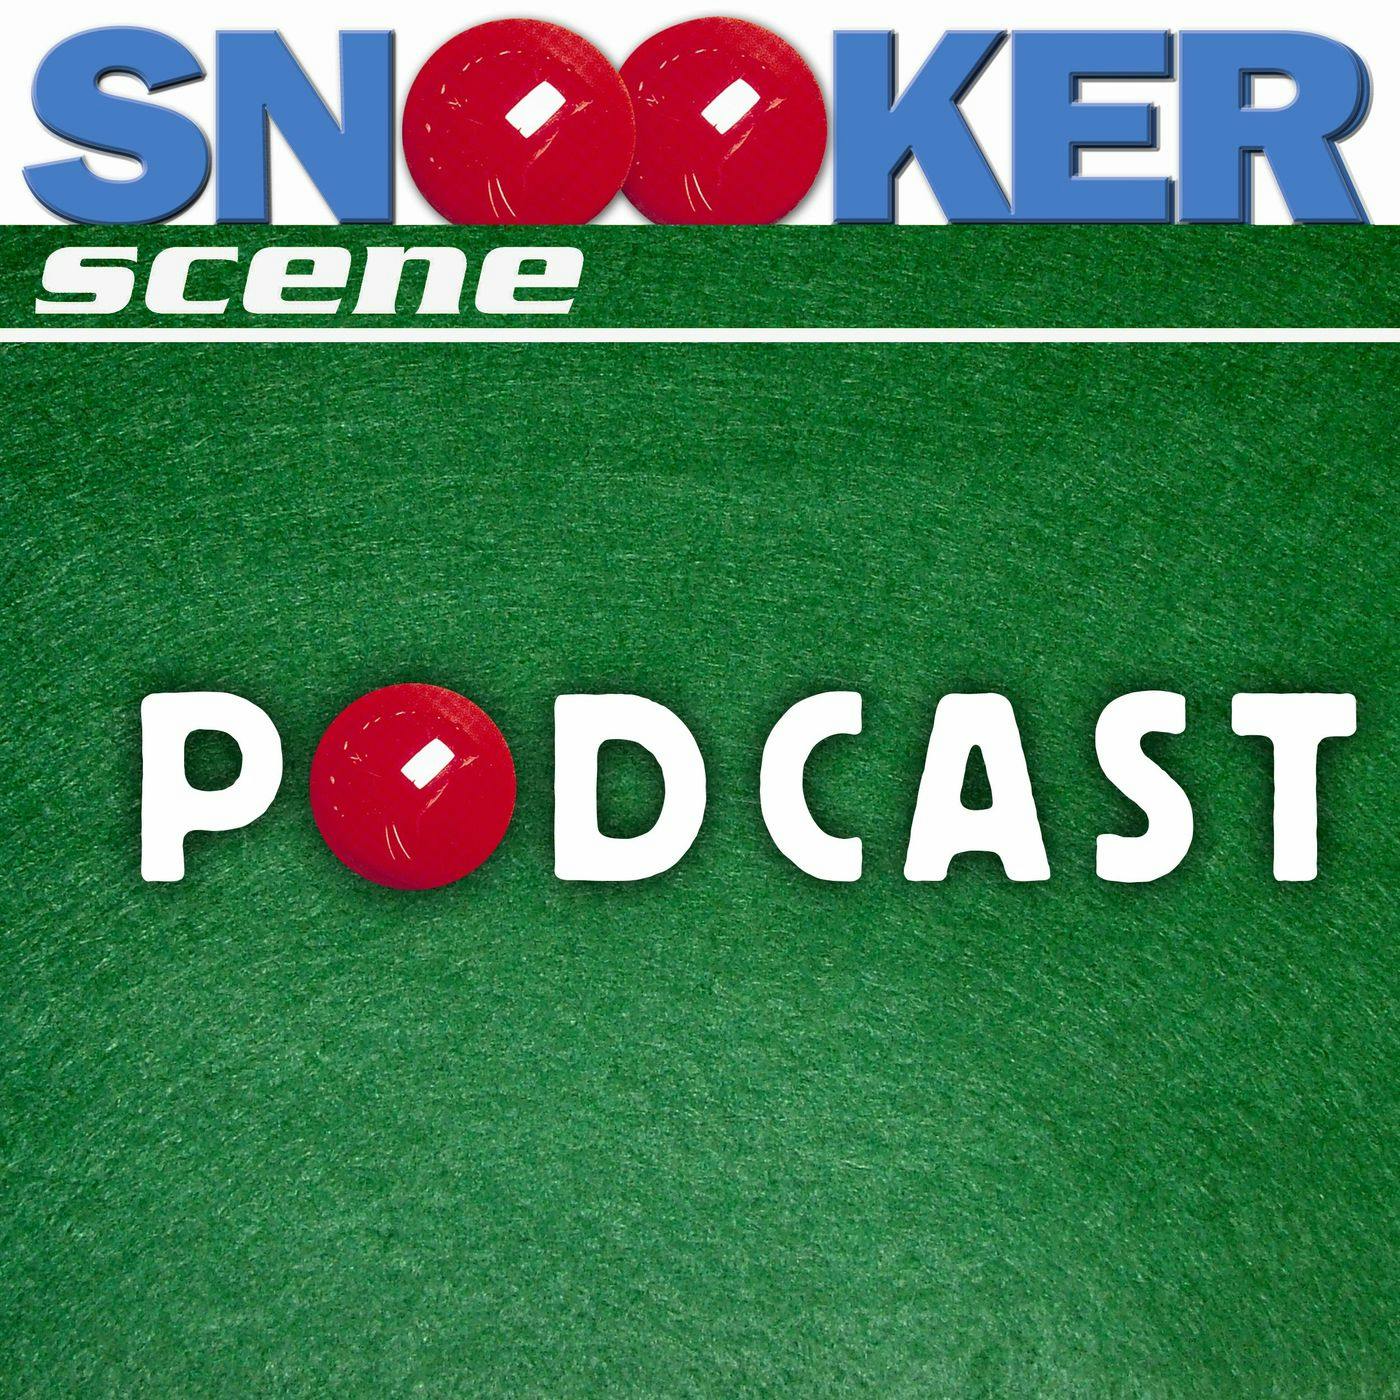 Snooker Scene Podcast episode 121 - Top Ten Tournaments of All Time (Part 1)